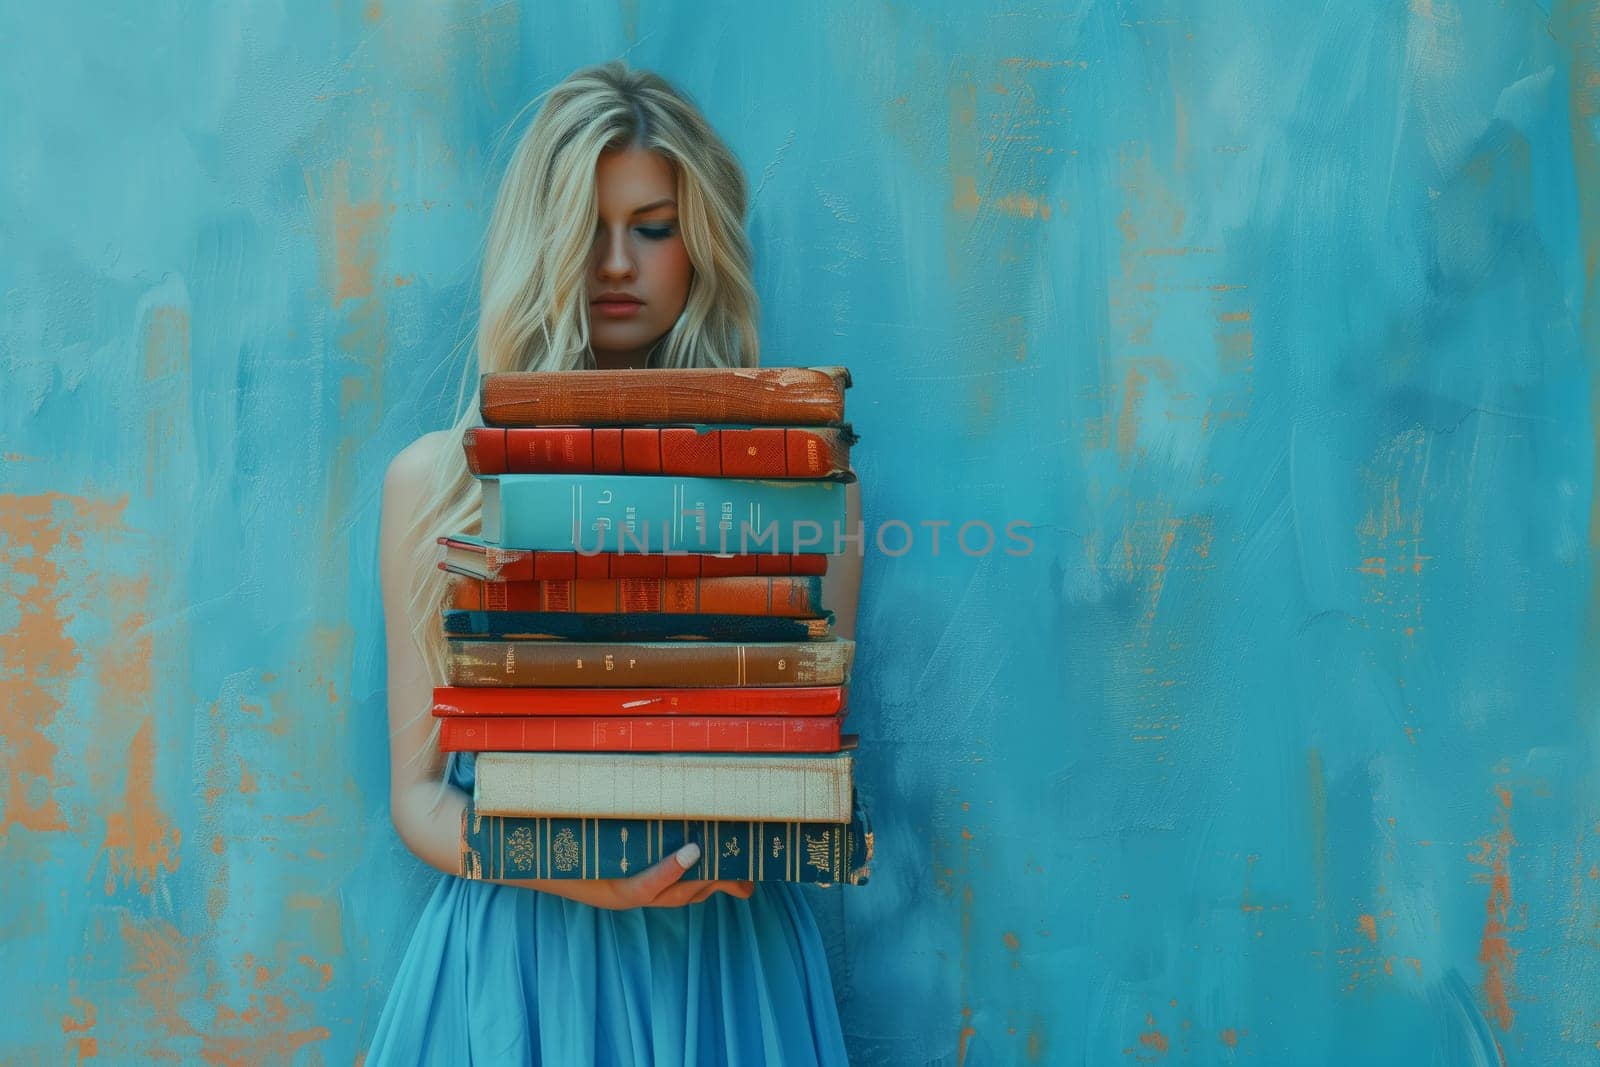 An artist in an azure blue dress is holding a stack of books, standing in front of a painting on wood. The electric blue color contrasts beautifully with the artwork